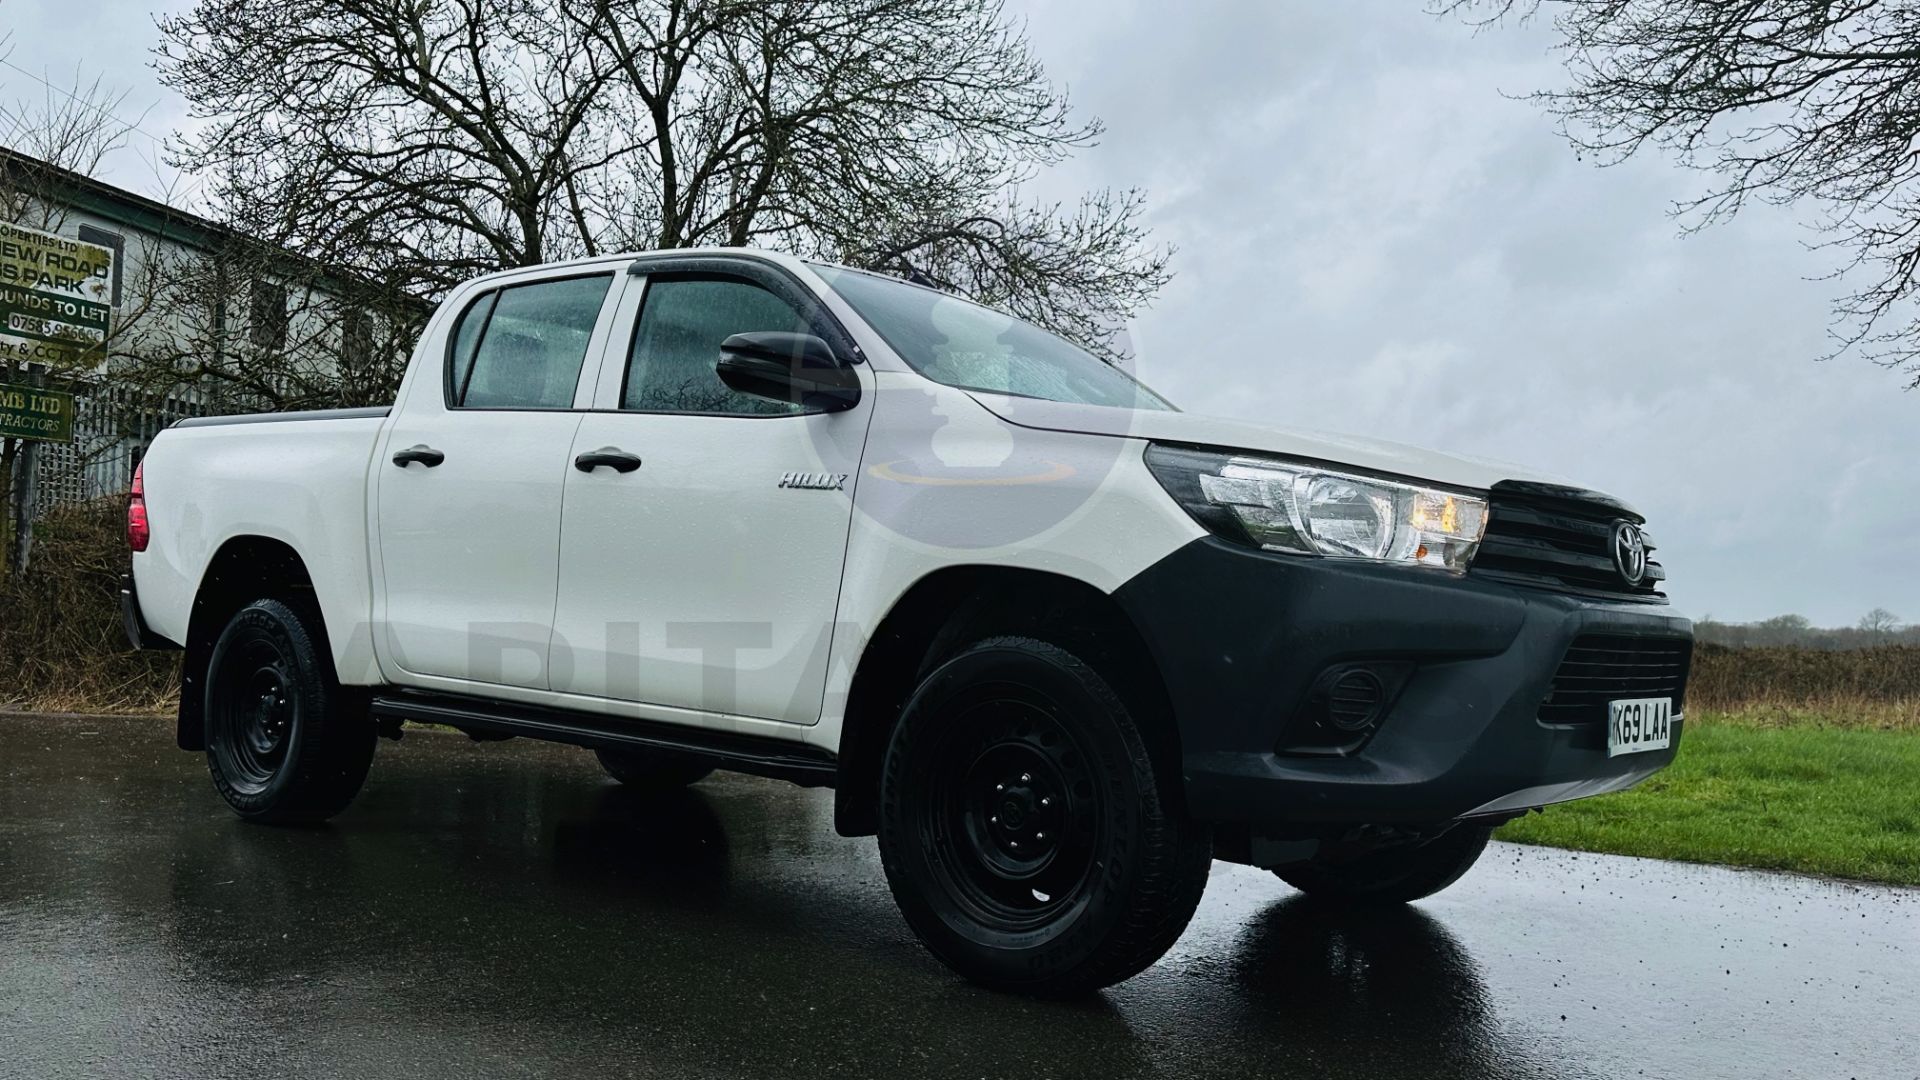 TOYOTA HILUX *DOUBLE CAB PICK-UP* (2020 - EURO 6) 2.4 D-4D - AUTO STOP/START *AIR CON* (1 OWNER) - Image 2 of 48